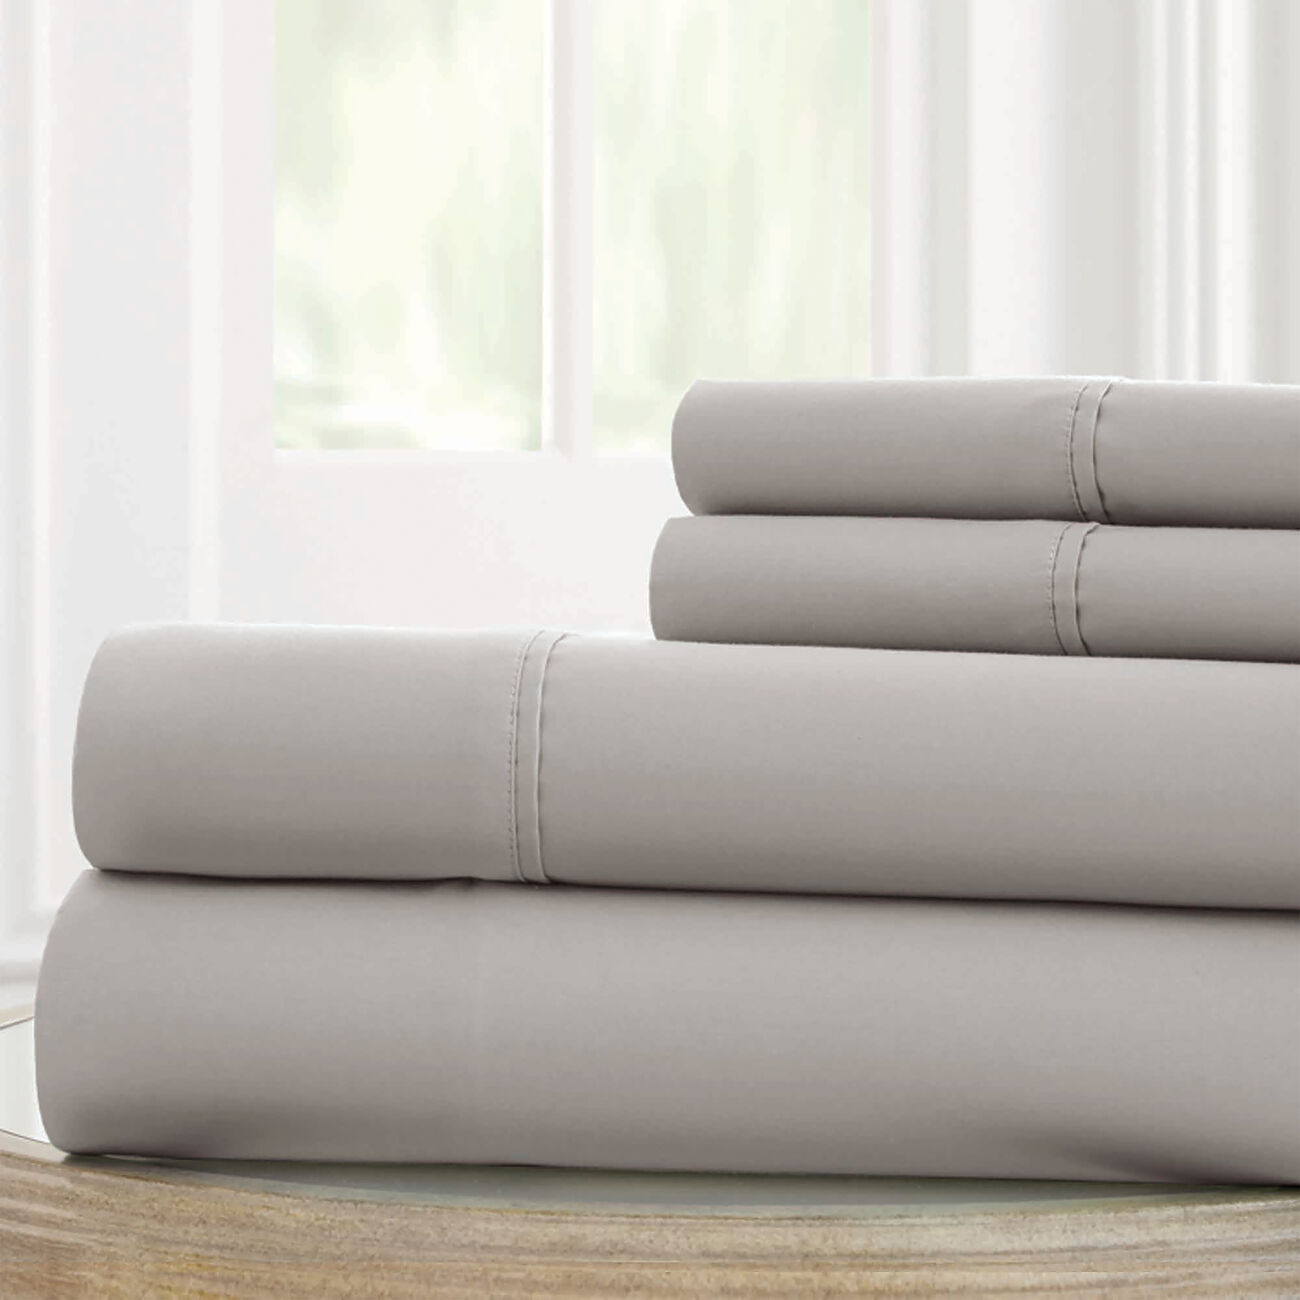 Bezons 4 Piece California King Microfiber Sheet Set with 1800 Thread Count, Gray